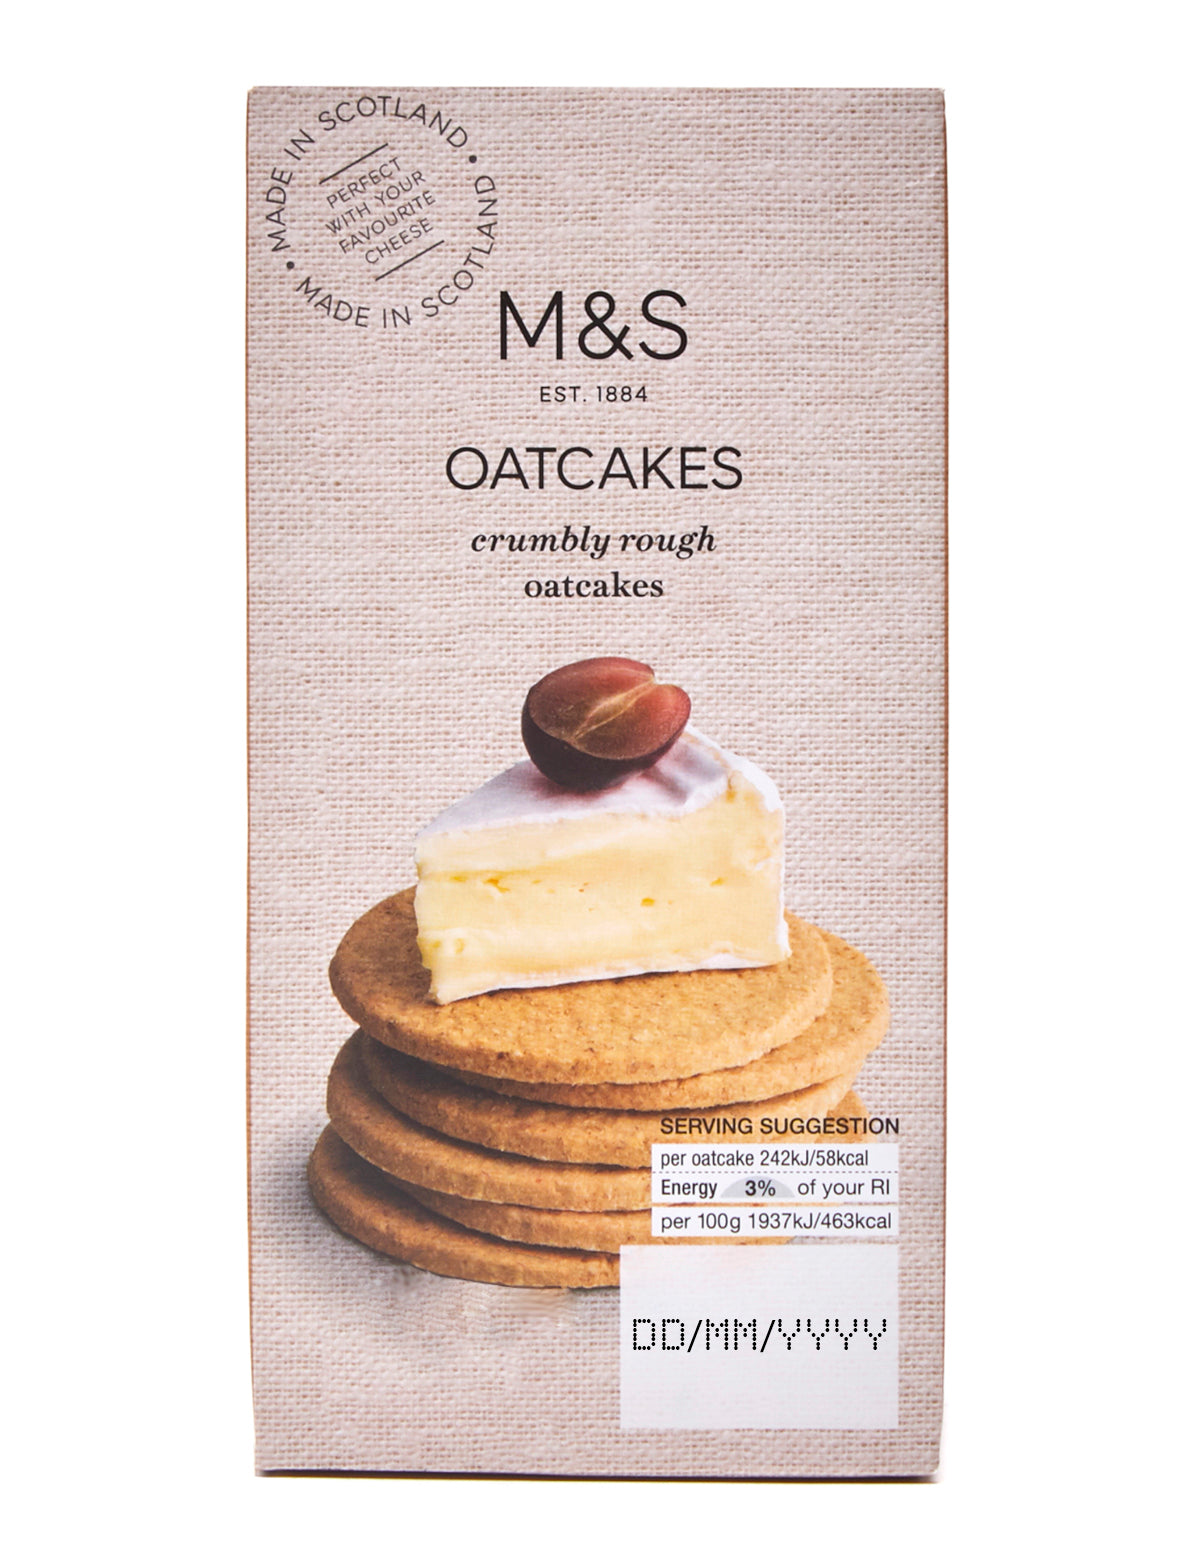 Oatcakes | Marks & Spencer Philippines | Reviews on Judge.me